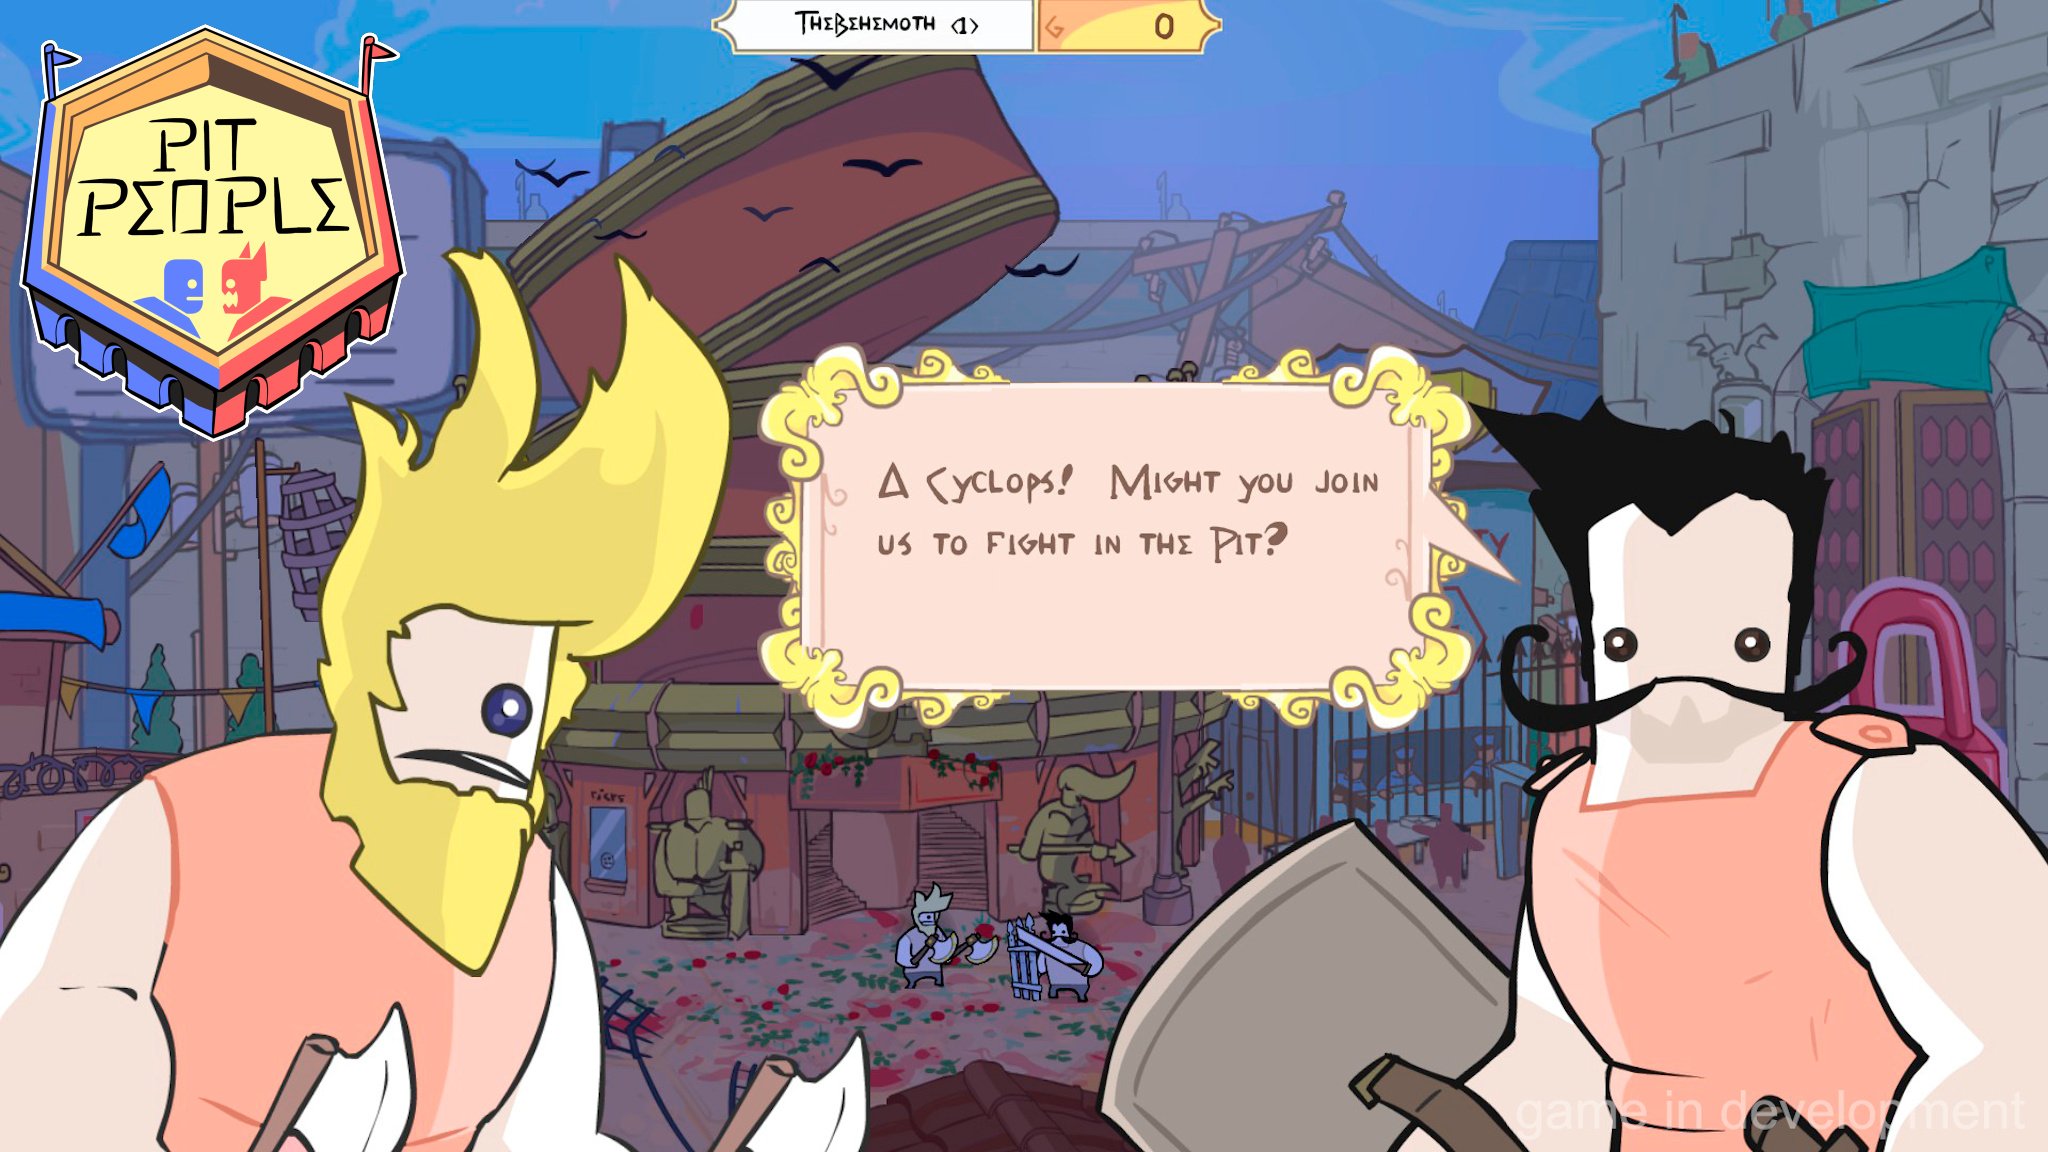 We played Pit People, the next Xbox One and Windows 10 game from the makers of Castle Crashers